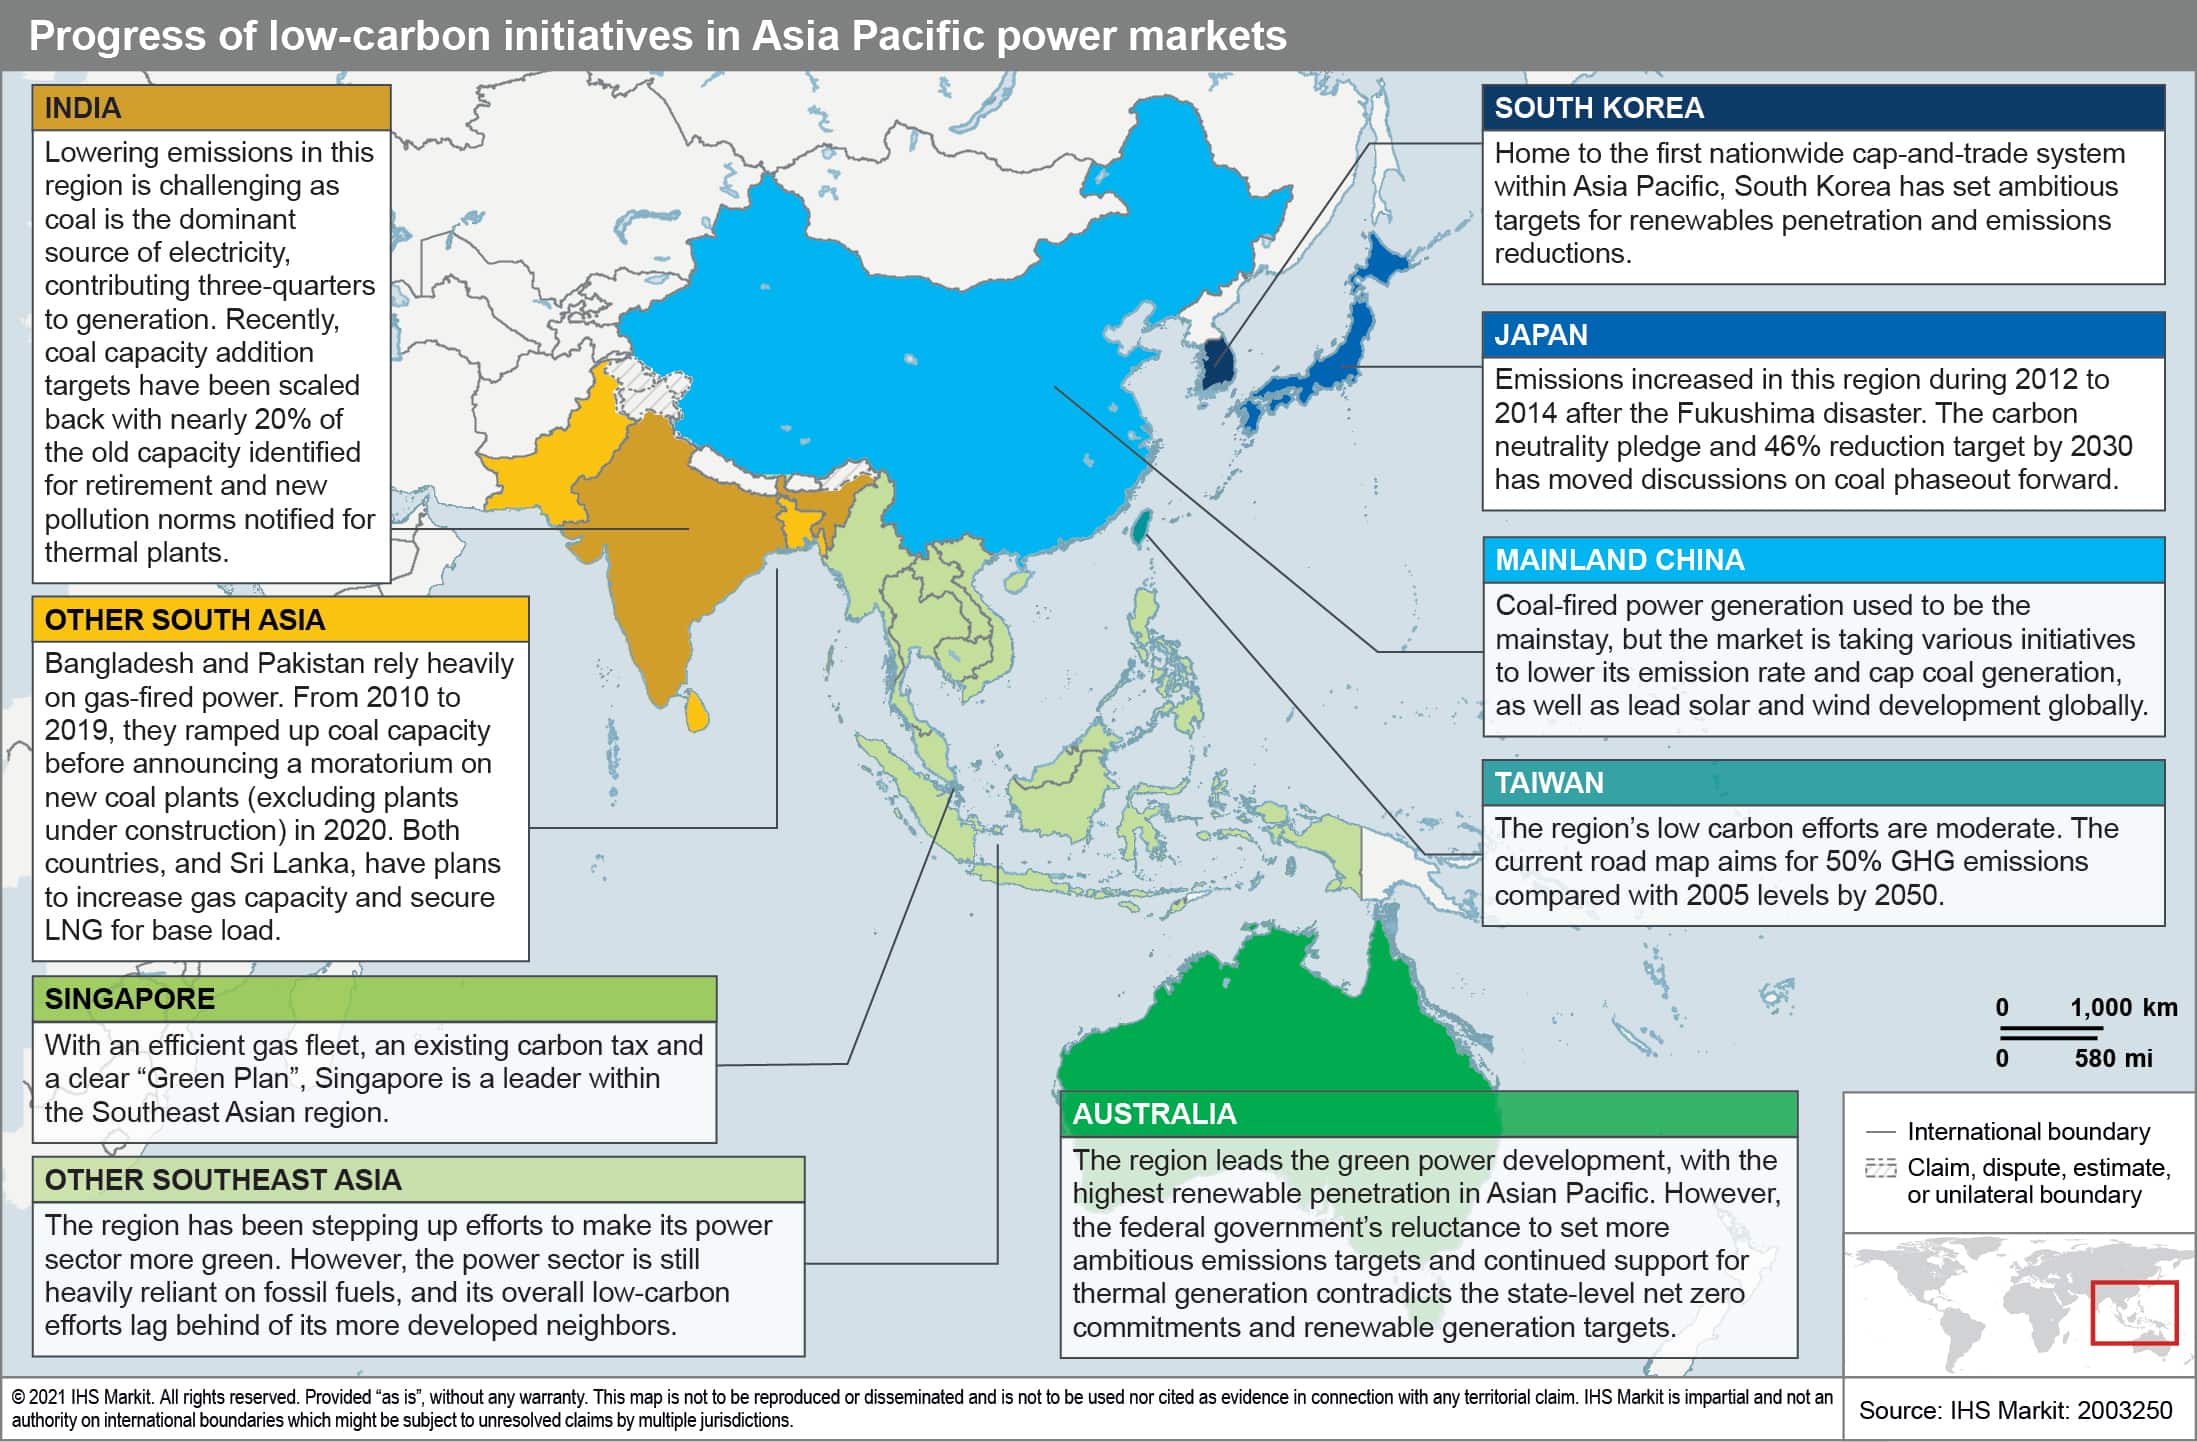 Progress of low-carbon initiatives in Asia Pacific power markets